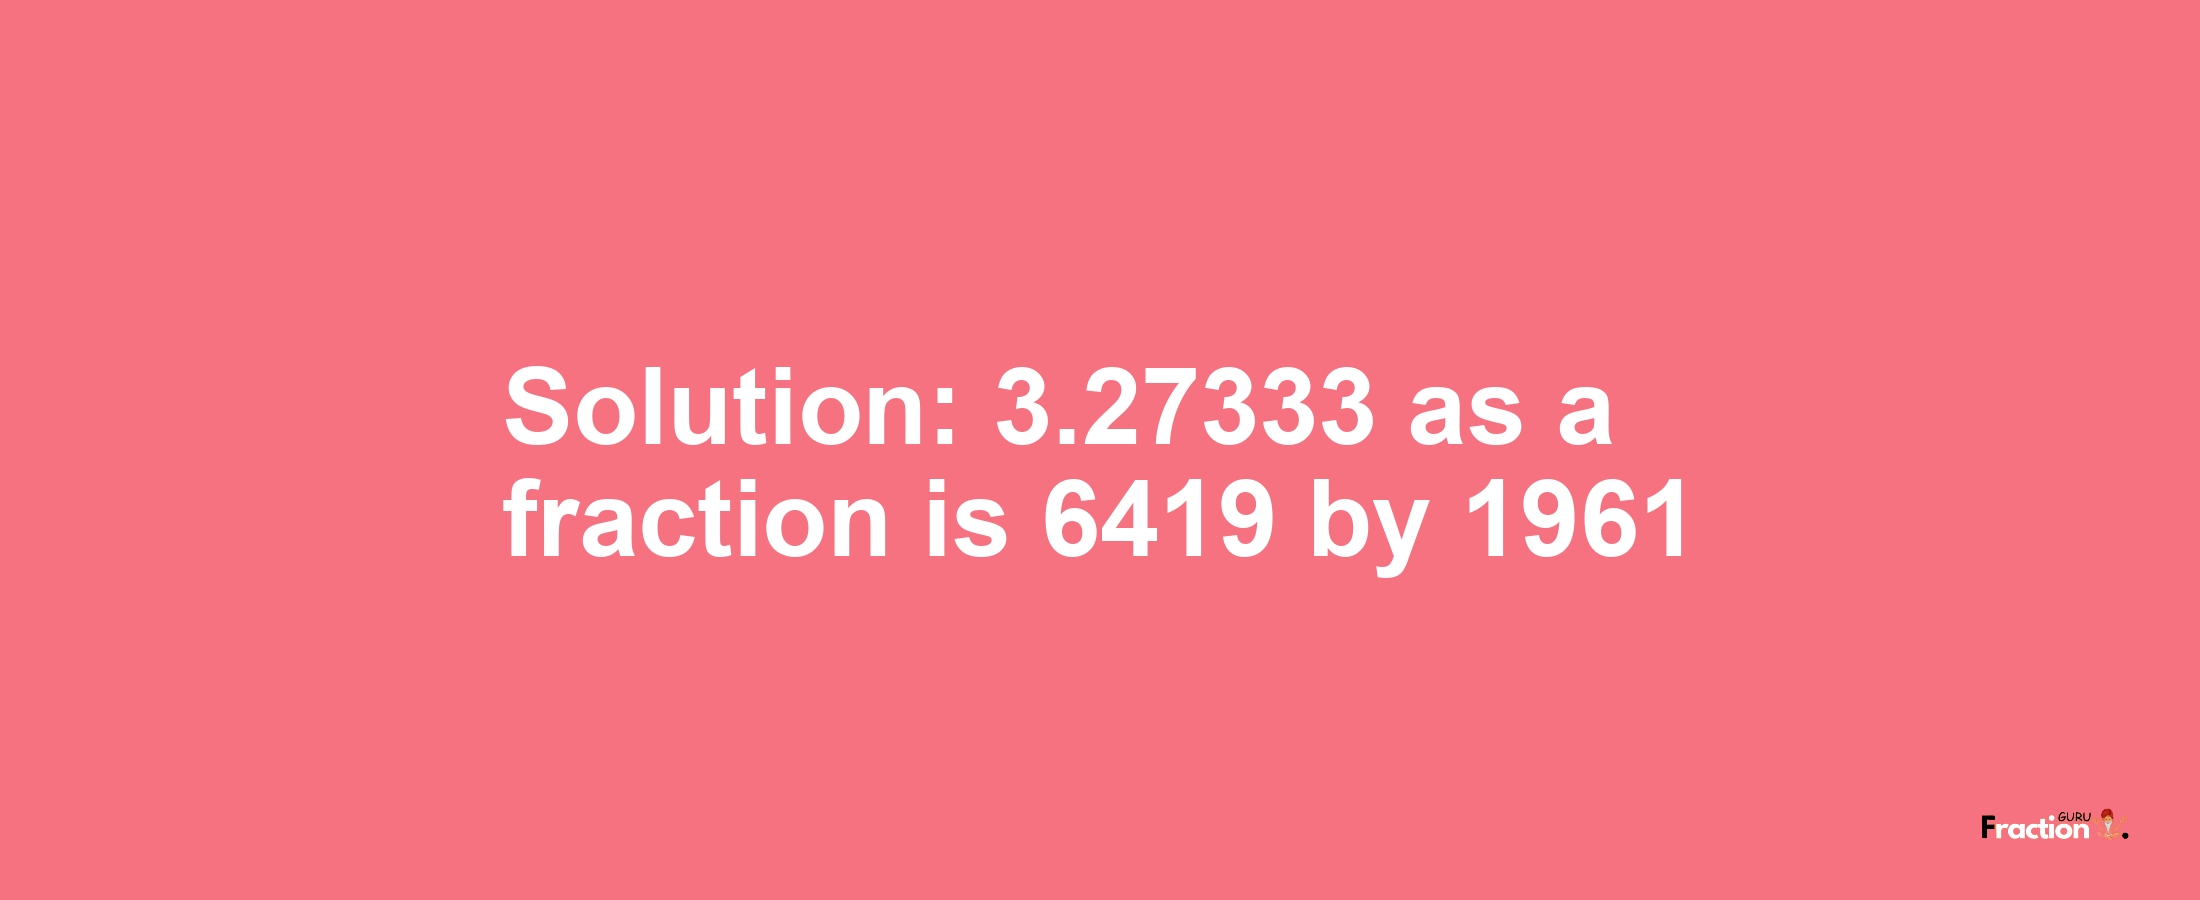 Solution:3.27333 as a fraction is 6419/1961